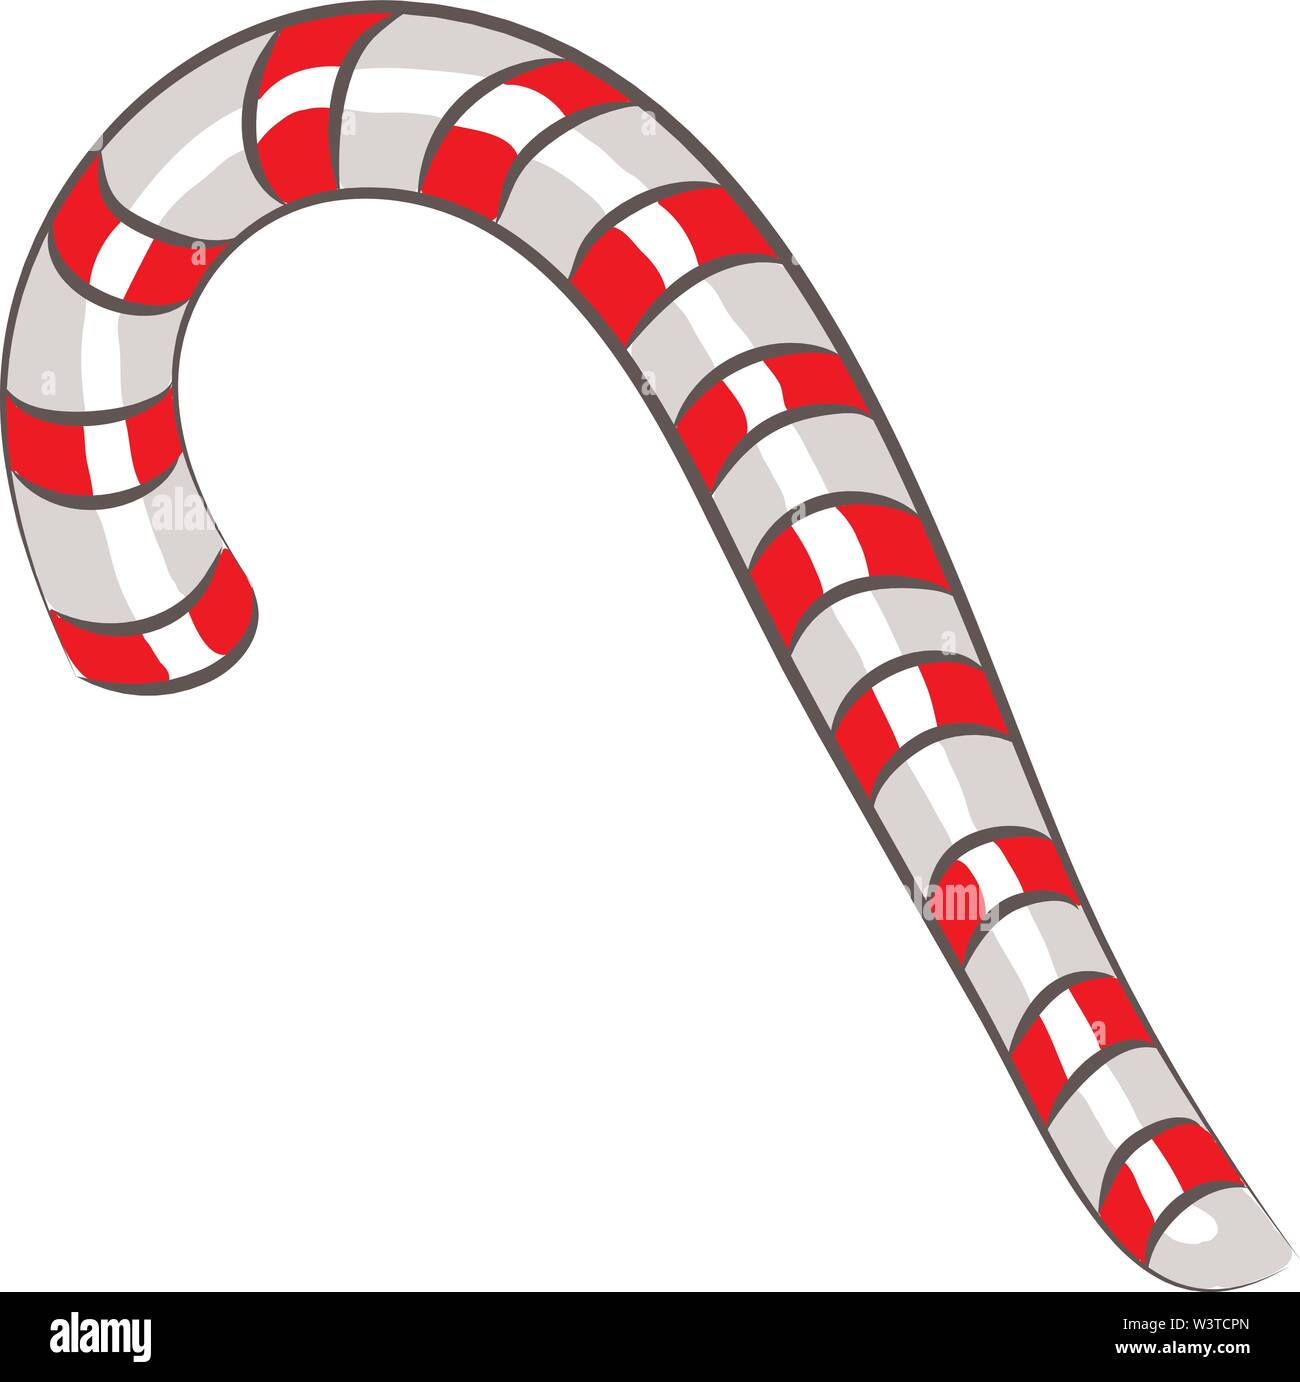 Candy Cane and Peppermints Sketch Stock Vector - Illustration of sketch,  children: 27877611